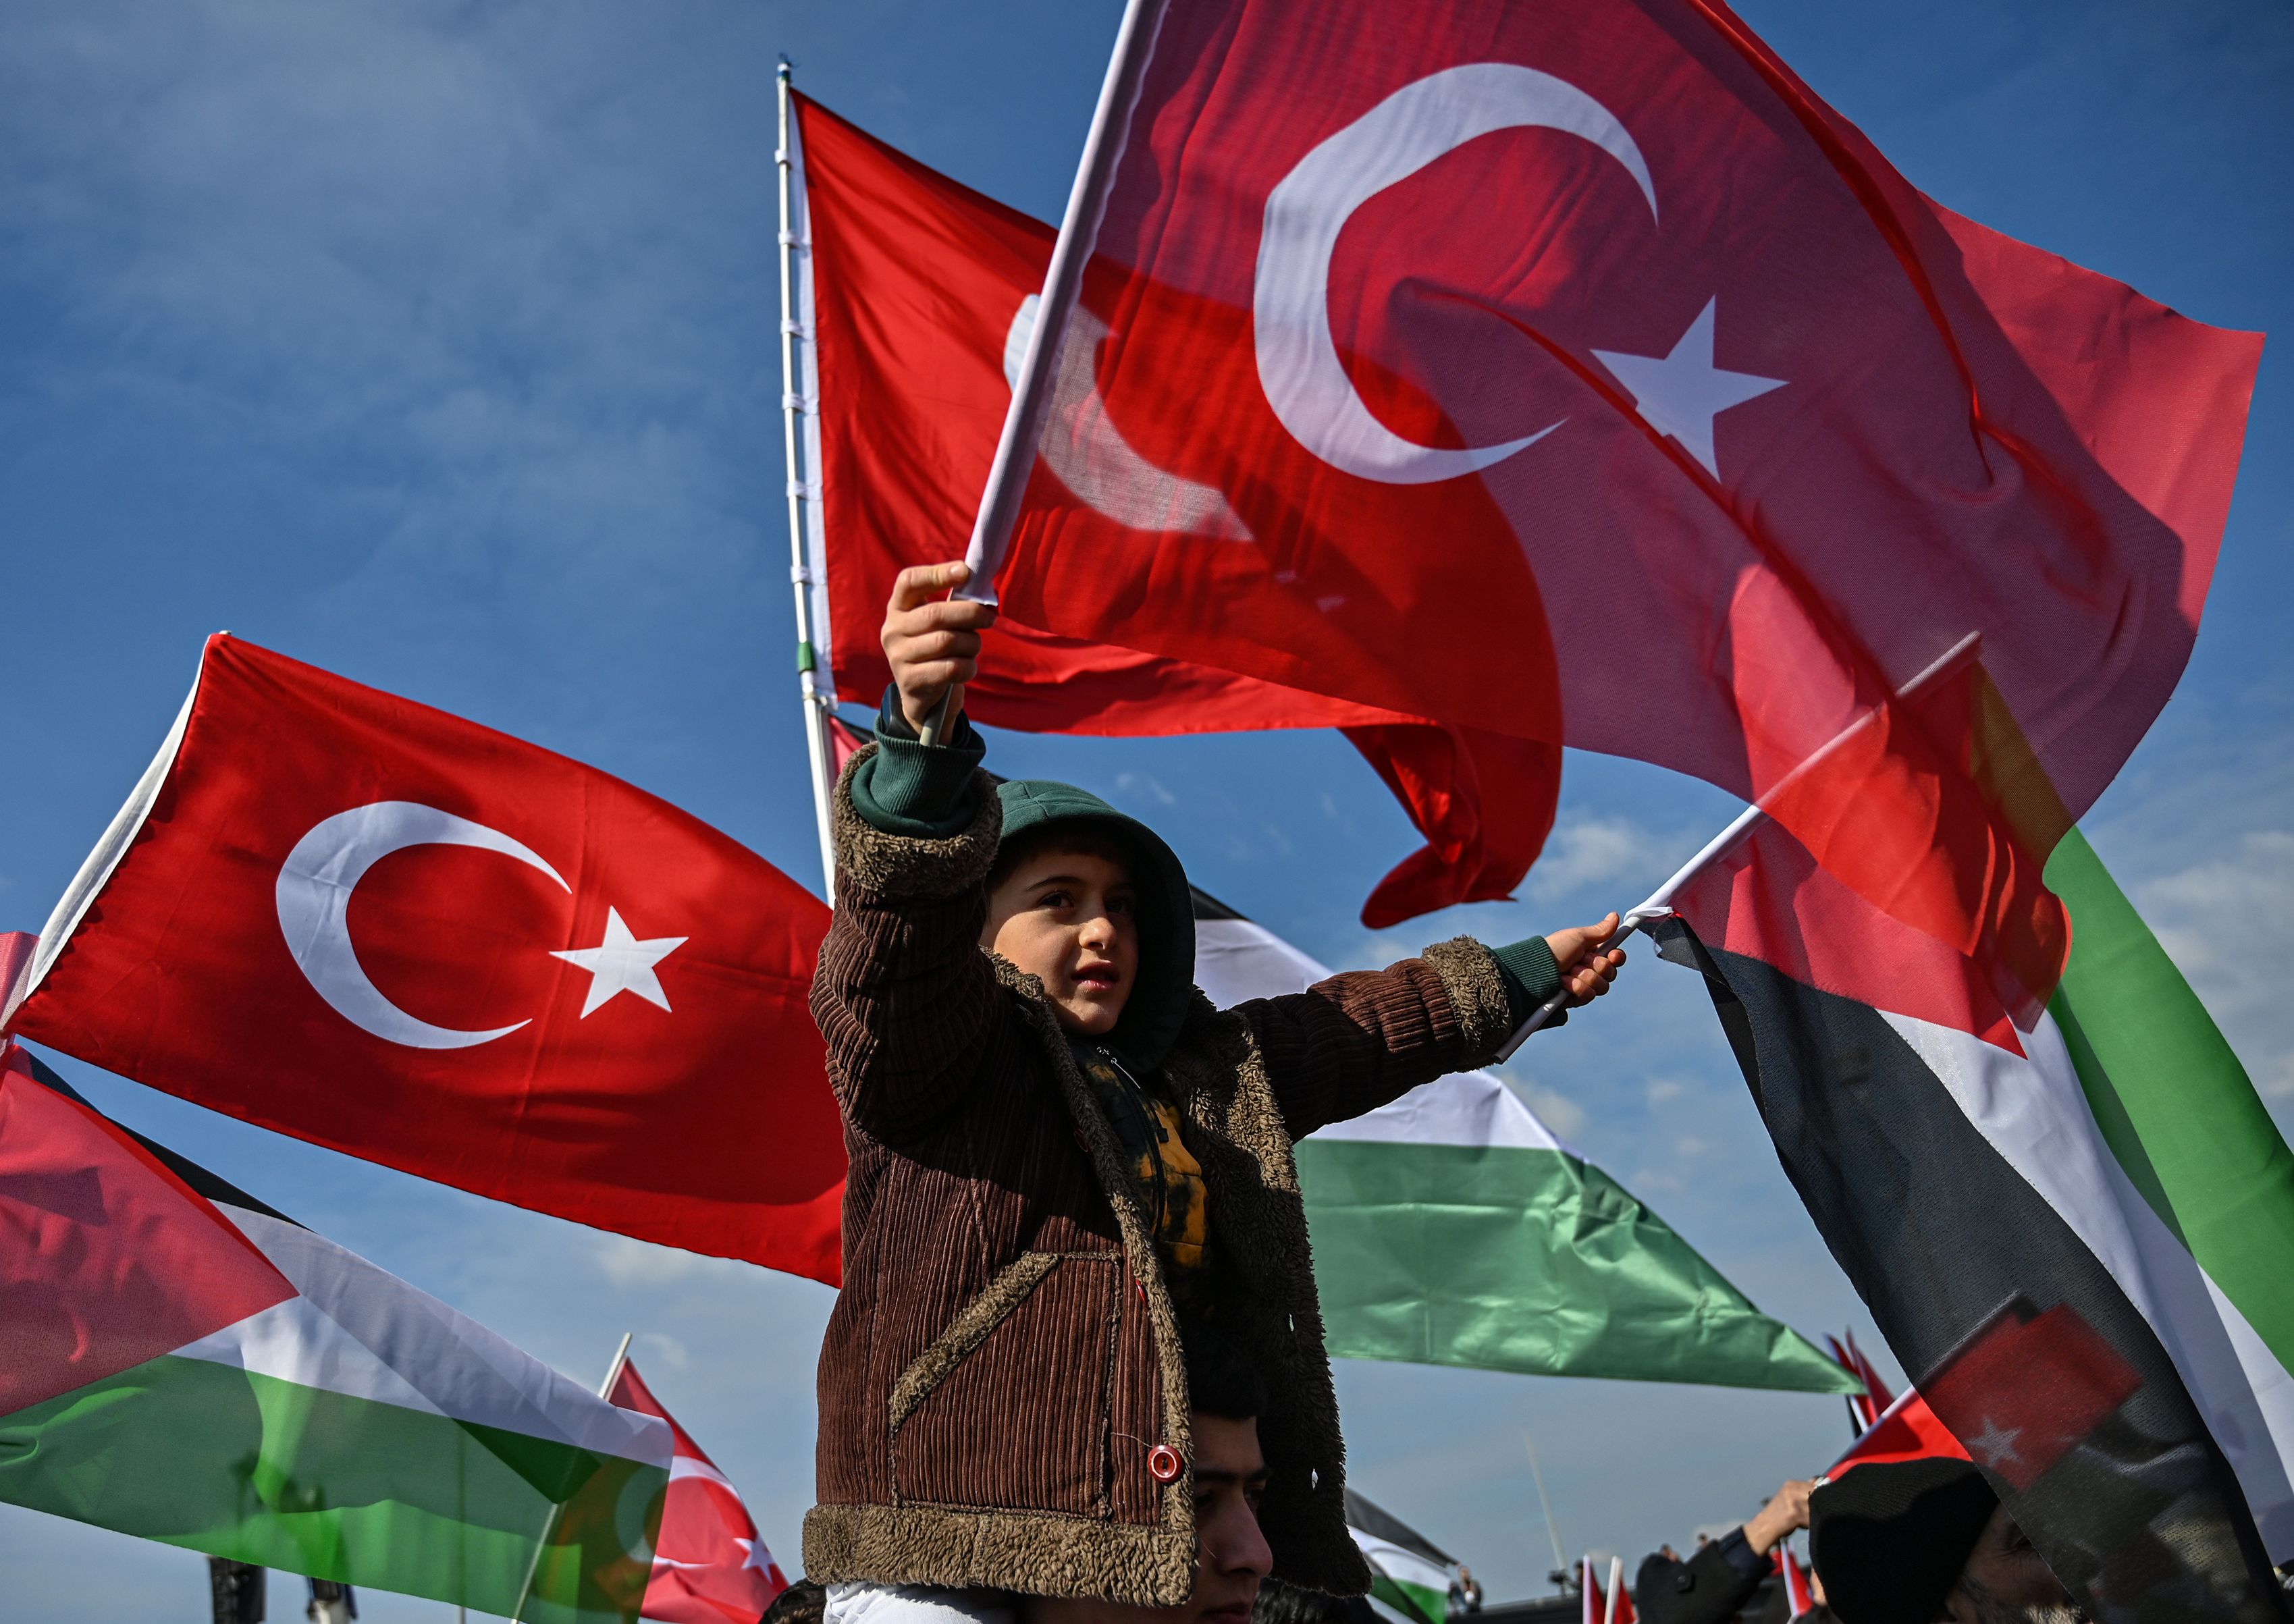 Young boy waves flag for Turkey and Palestine